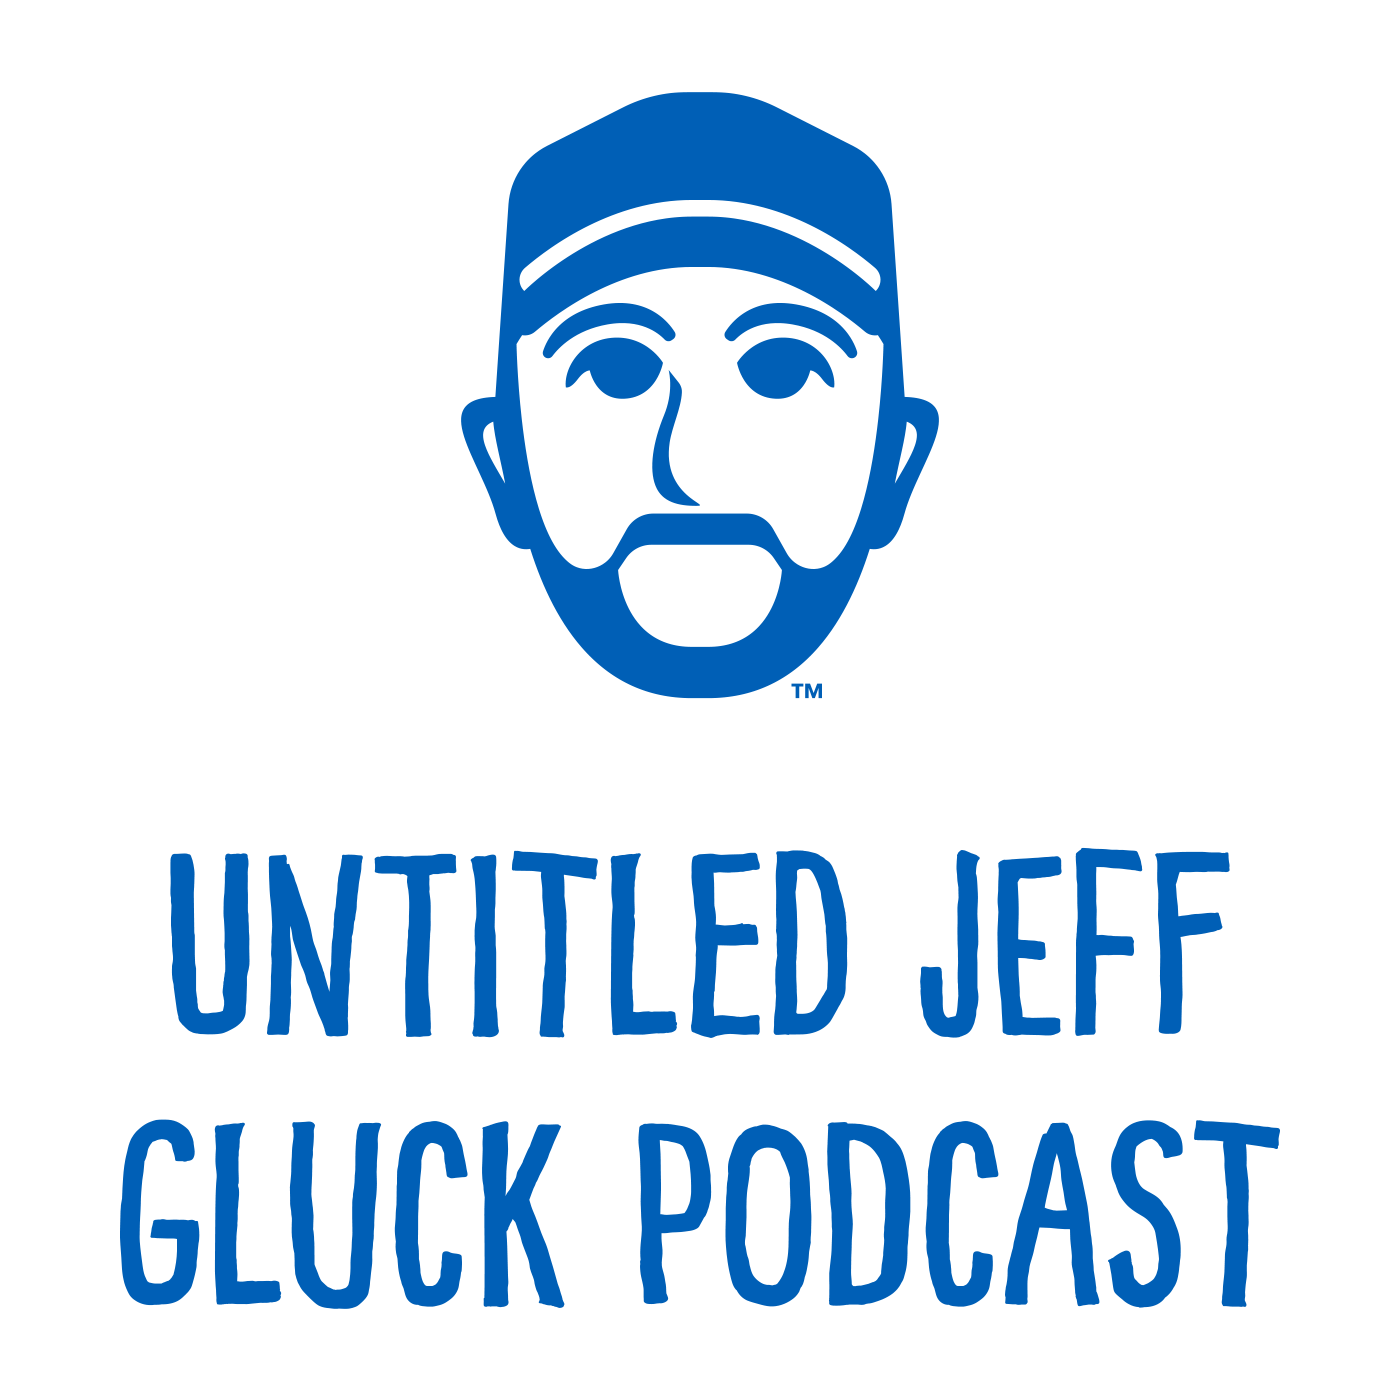 The Untitled Jeff Gluck Podcast